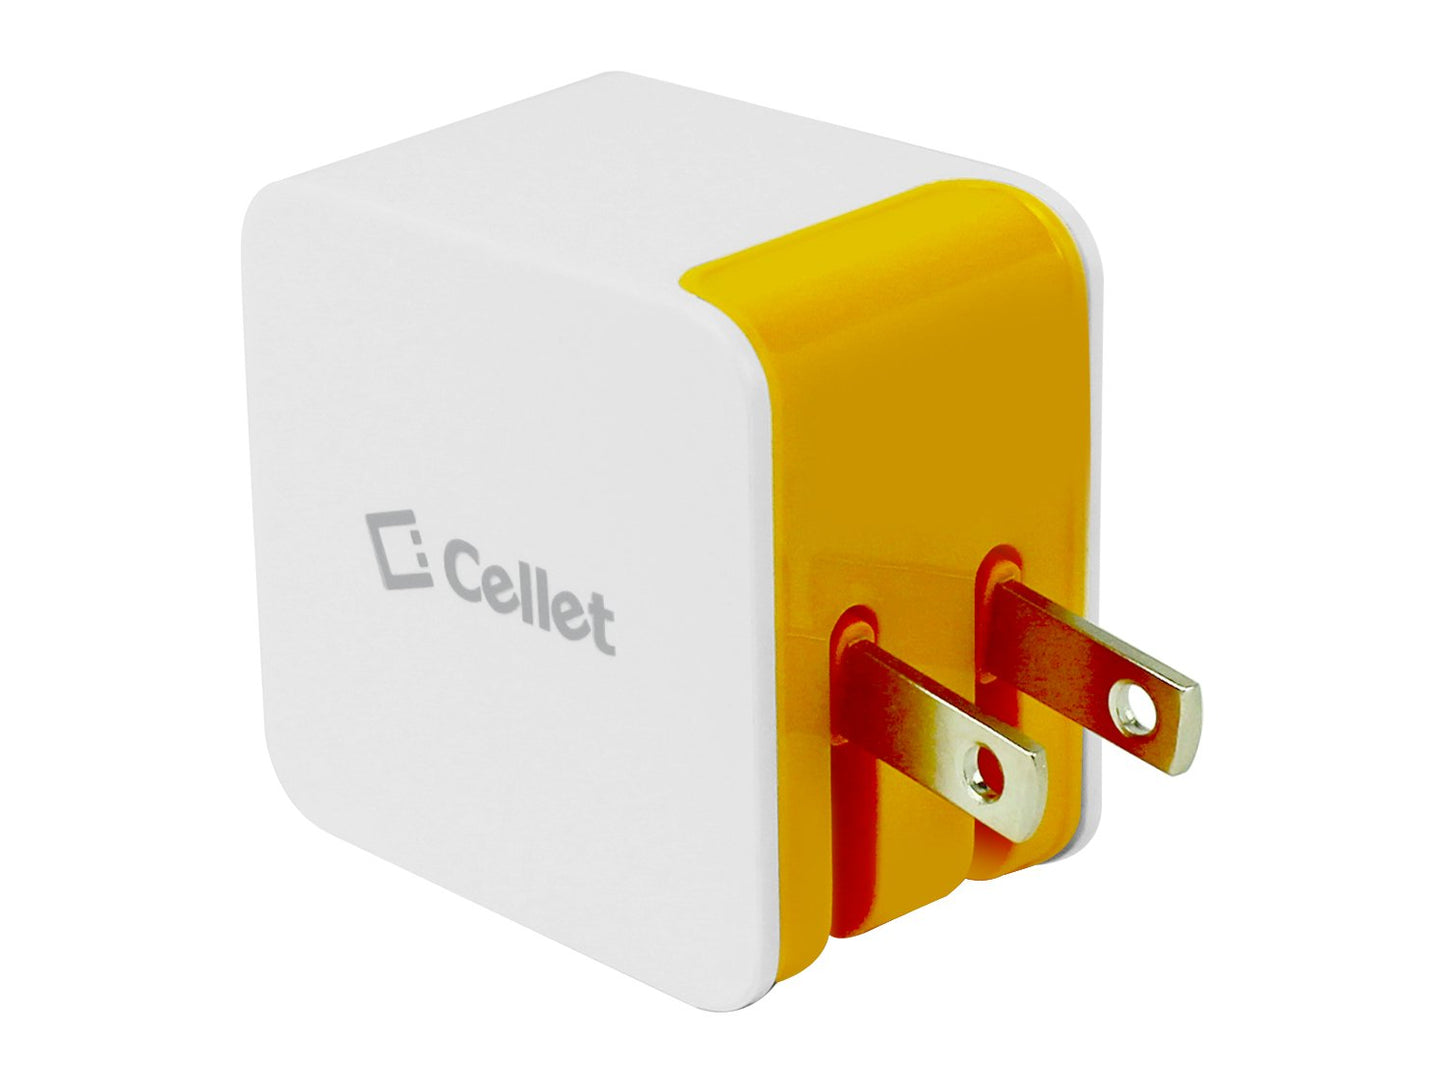 TCMICRONB - Cellet Universal High Powered 12W/2.4A Dual USB Home Charger UL & DOE 6 CERTIFIED (Cable sold Separately)